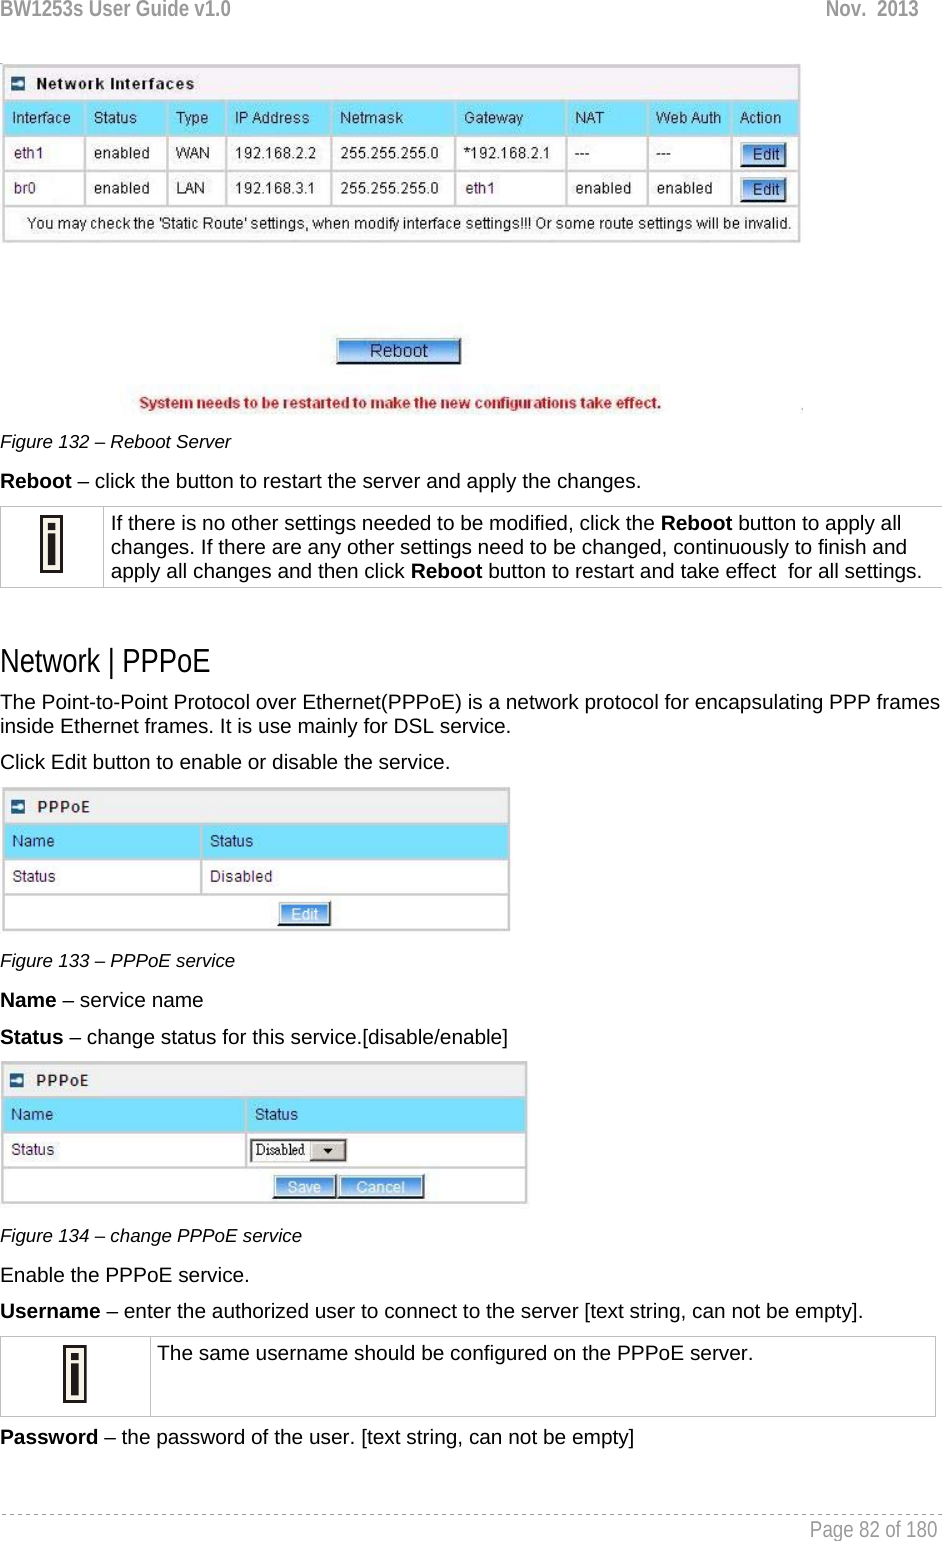 BW1253s User Guide v1.0  Nov.  2013     Page 82 of 180    Figure 132 – Reboot Server Reboot – click the button to restart the server and apply the changes.  If there is no other settings needed to be modified, click the Reboot button to apply all changes. If there are any other settings need to be changed, continuously to finish and apply all changes and then click Reboot button to restart and take effect  for all settings.  Network | PPPoE The Point-to-Point Protocol over Ethernet(PPPoE) is a network protocol for encapsulating PPP frames inside Ethernet frames. It is use mainly for DSL service. Click Edit button to enable or disable the service.  Figure 133 – PPPoE service Name – service name Status – change status for this service.[disable/enable]  Figure 134 – change PPPoE service Enable the PPPoE service. Username – enter the authorized user to connect to the server [text string, can not be empty].  The same username should be configured on the PPPoE server. Password – the password of the user. [text string, can not be empty]  